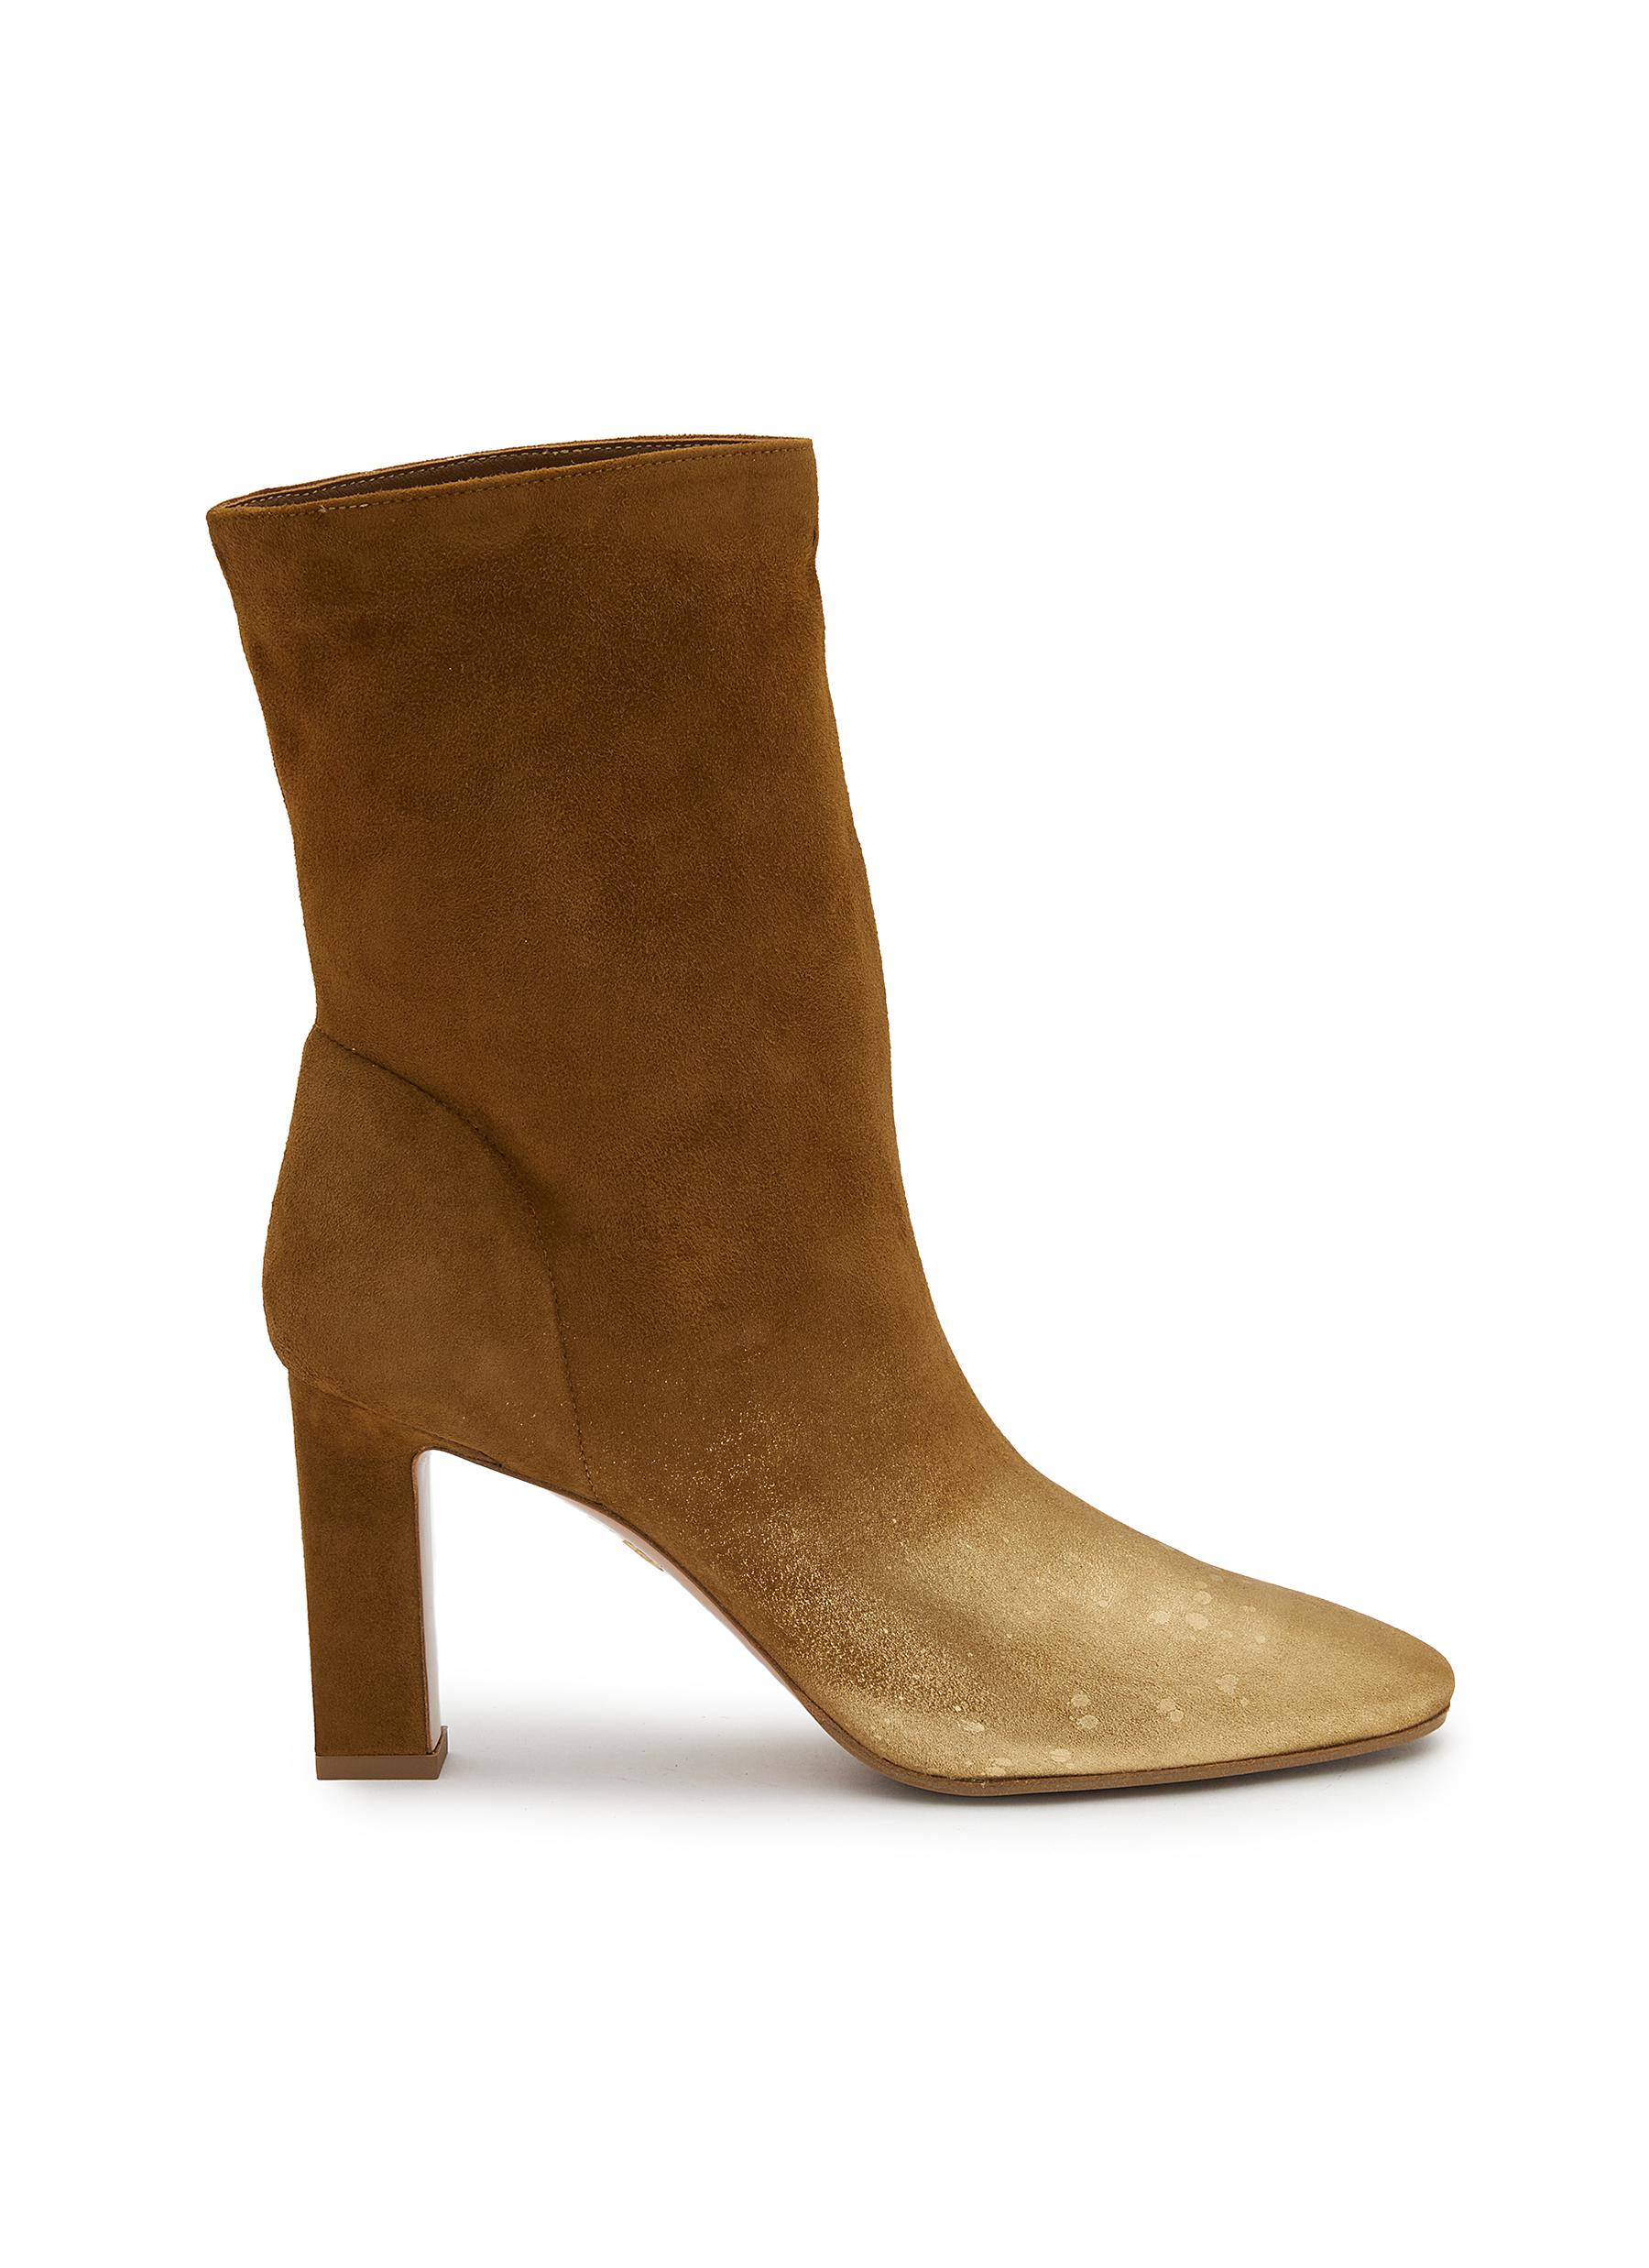 Manzoni 85 Suede Boots